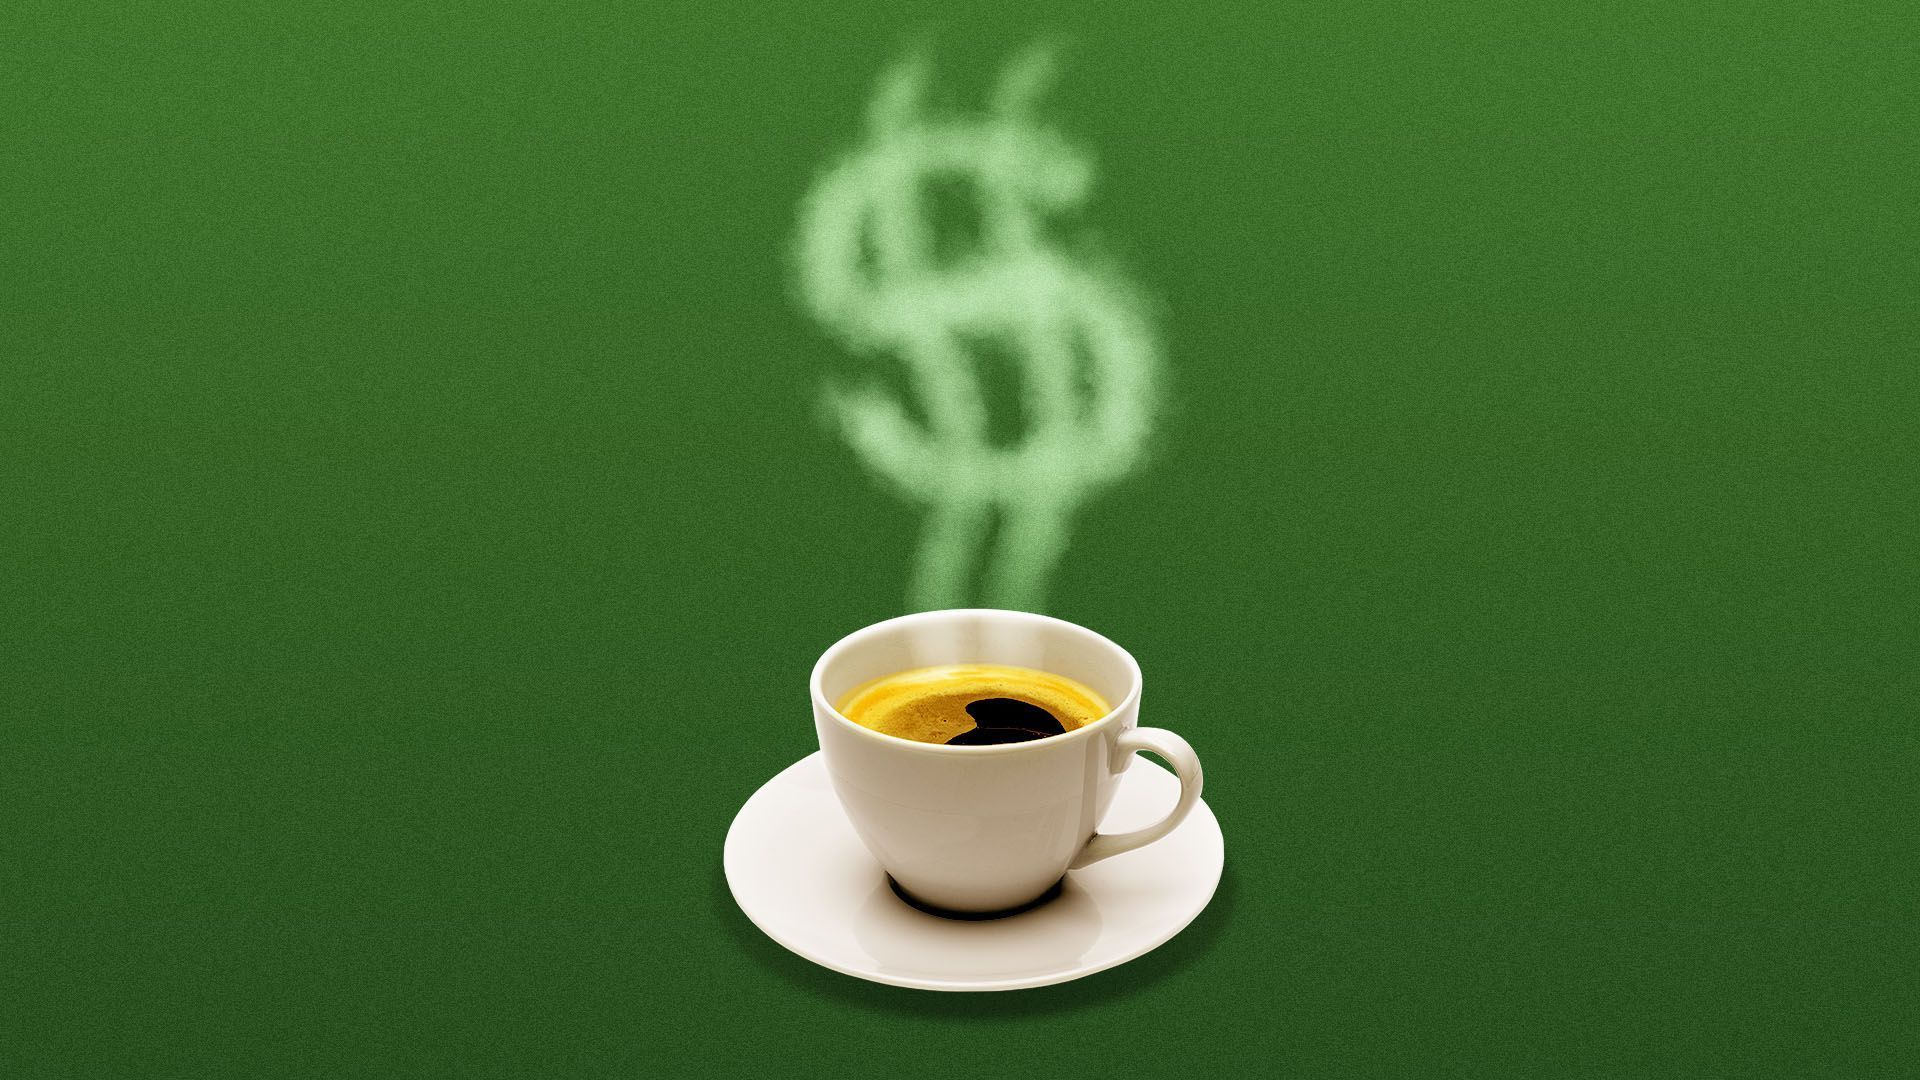 An illustration of a cup of coffee with steam shaped like a dollar sign.